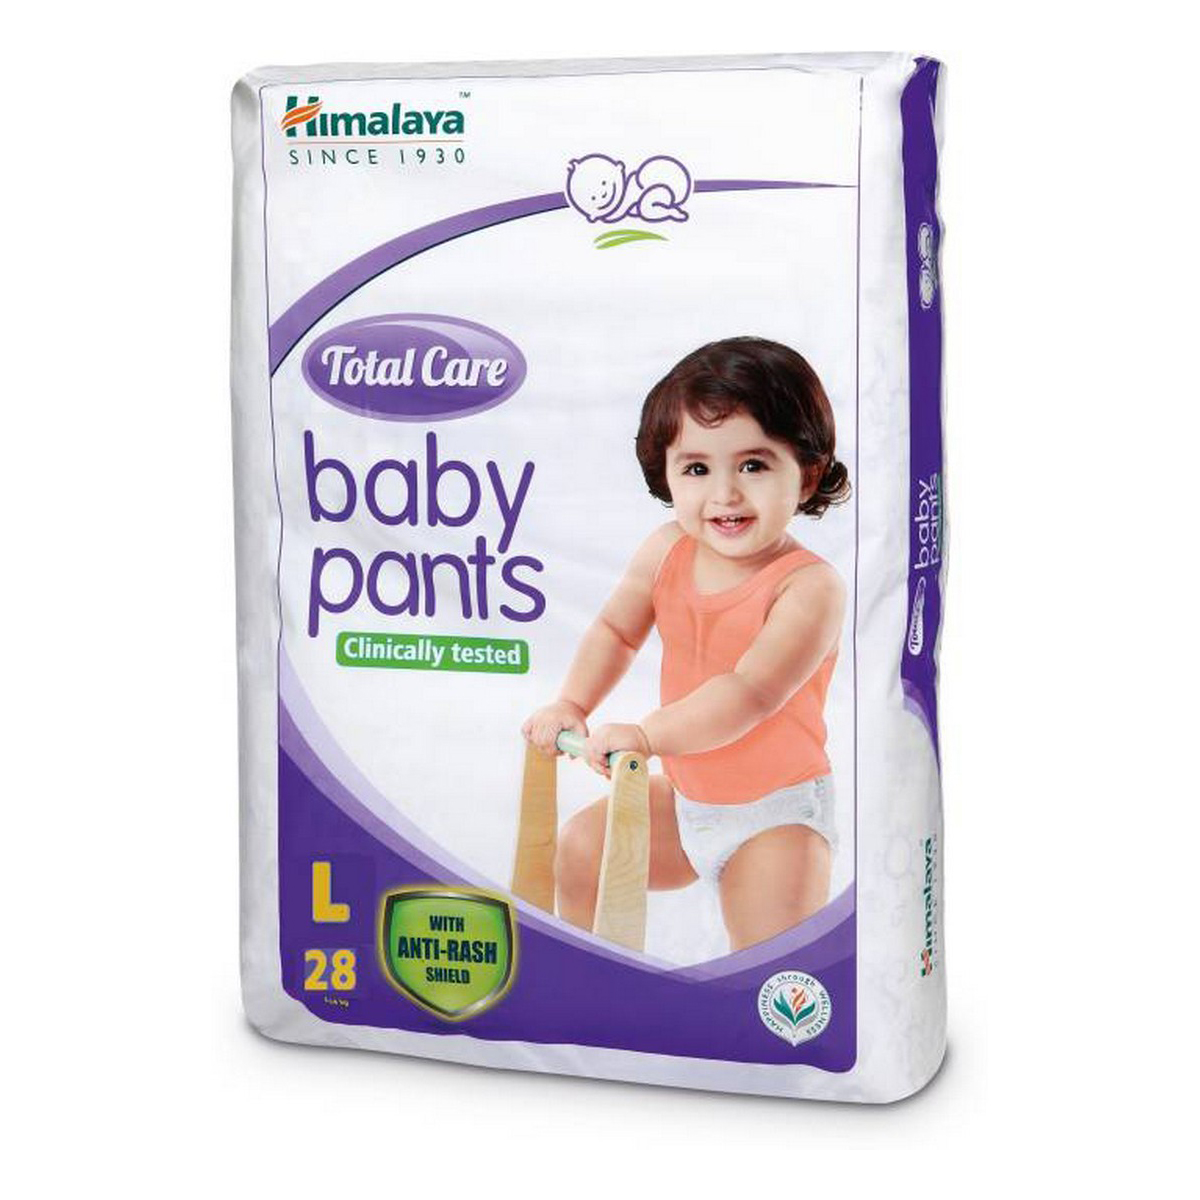 Himalaya Total care Baby Pants Diapers large (28 count)